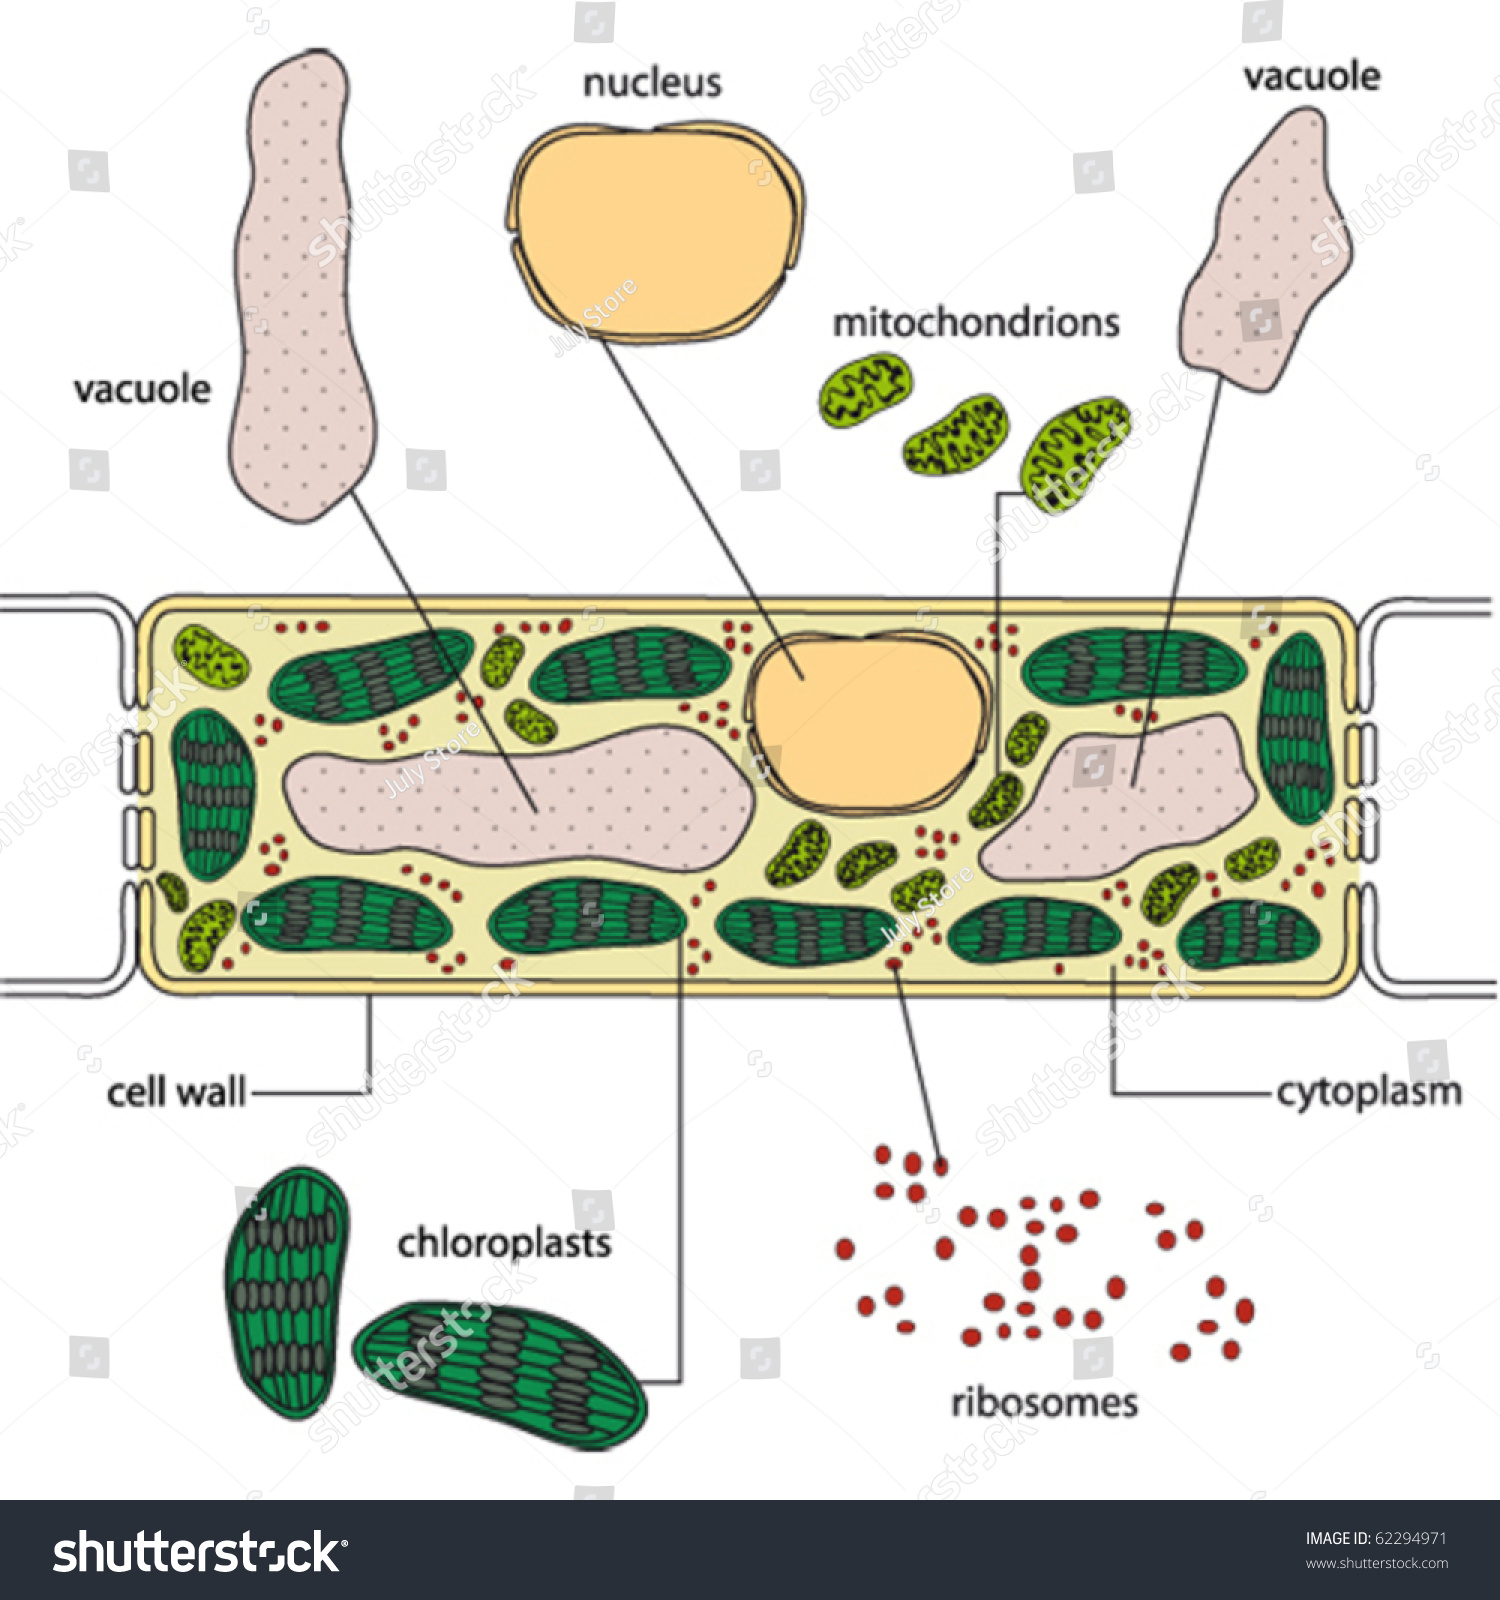 Simplified Structure Plant Cell Vector Stock Vector 62294971 - Shutterstock